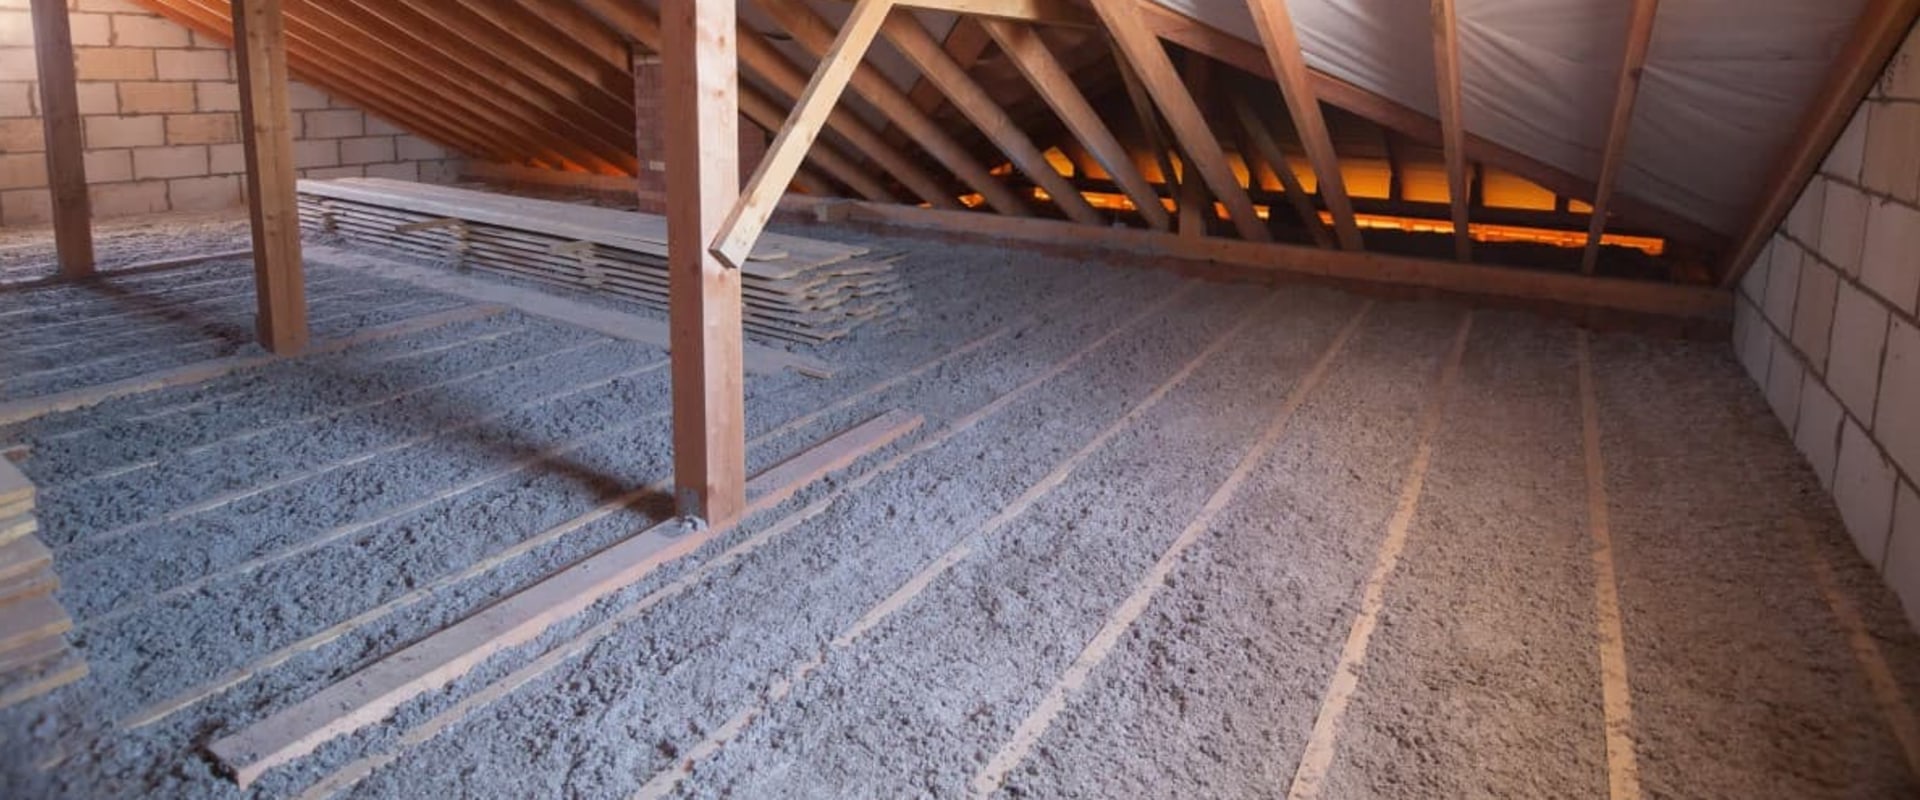 Are There Any Health Risks to Consider When Installing Attic Insulation?